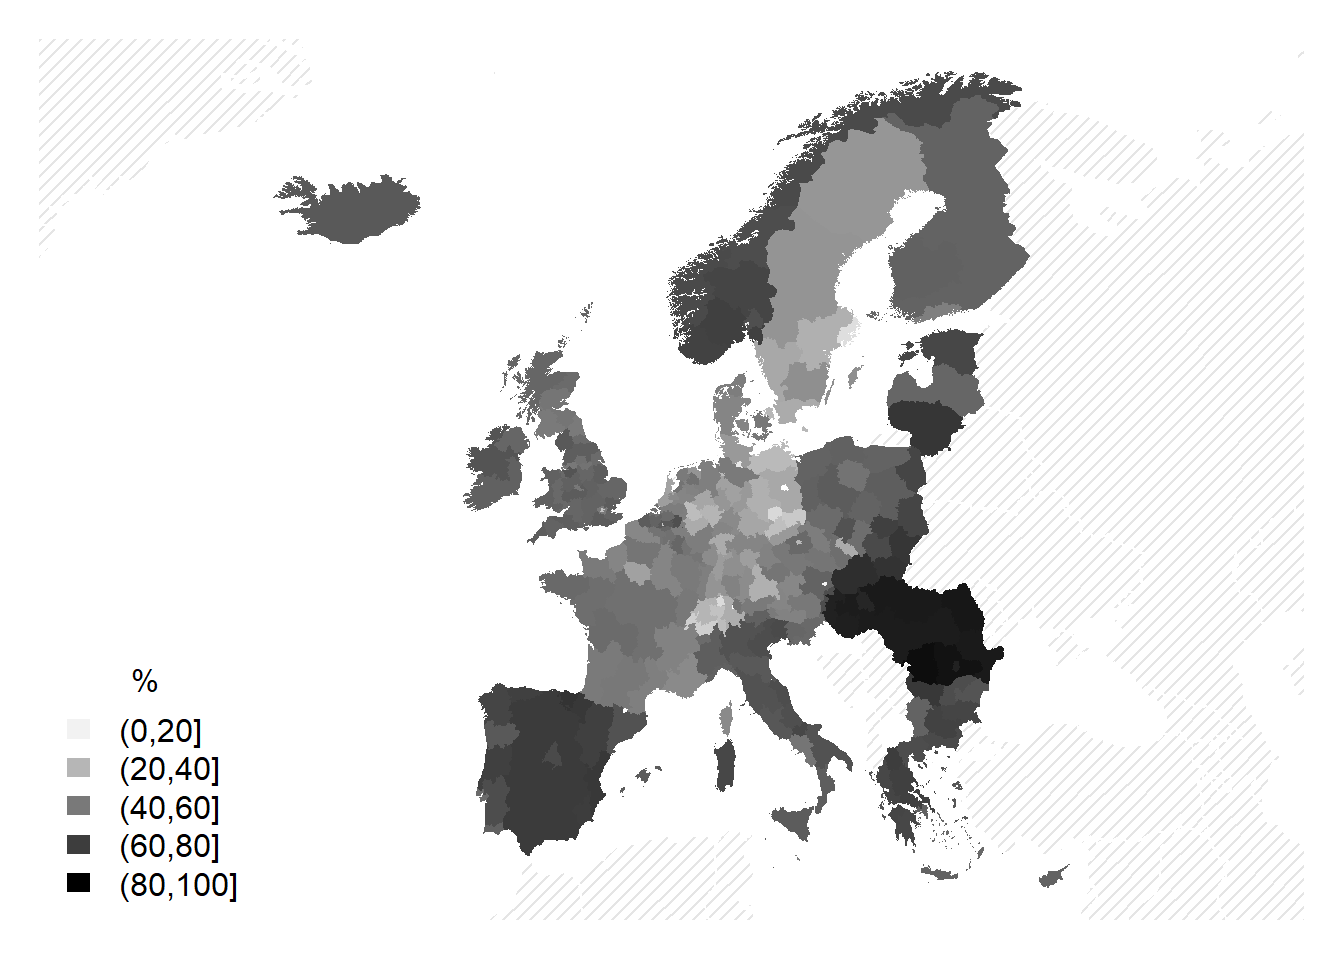 Homeownership rates in the EU NUTS2 regions, 2011